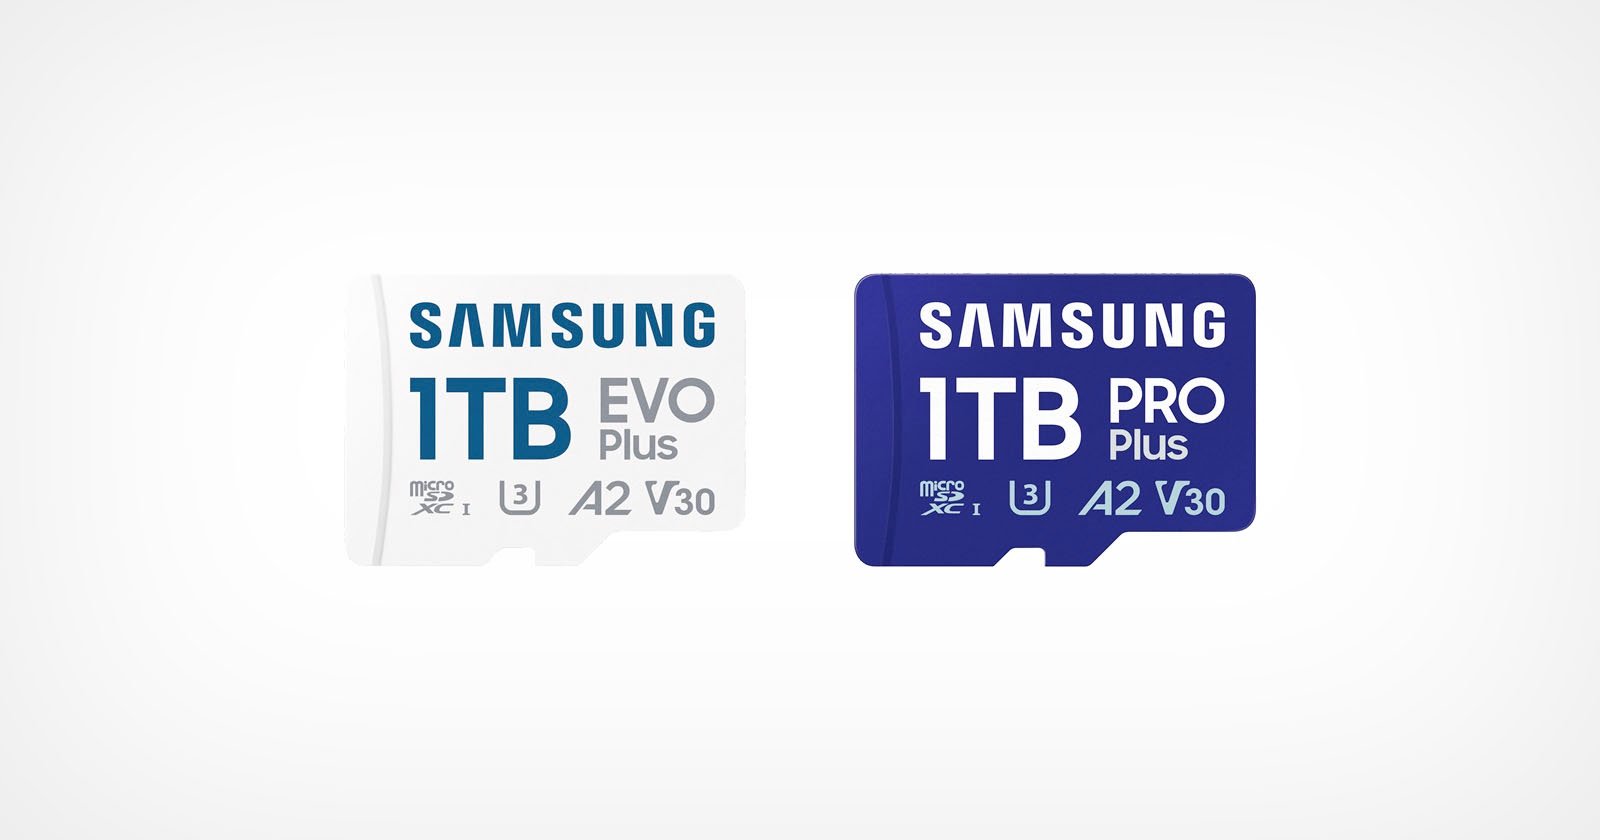 Samsungs New 800 MB/s microSD Card is Worlds First to Use SD Express